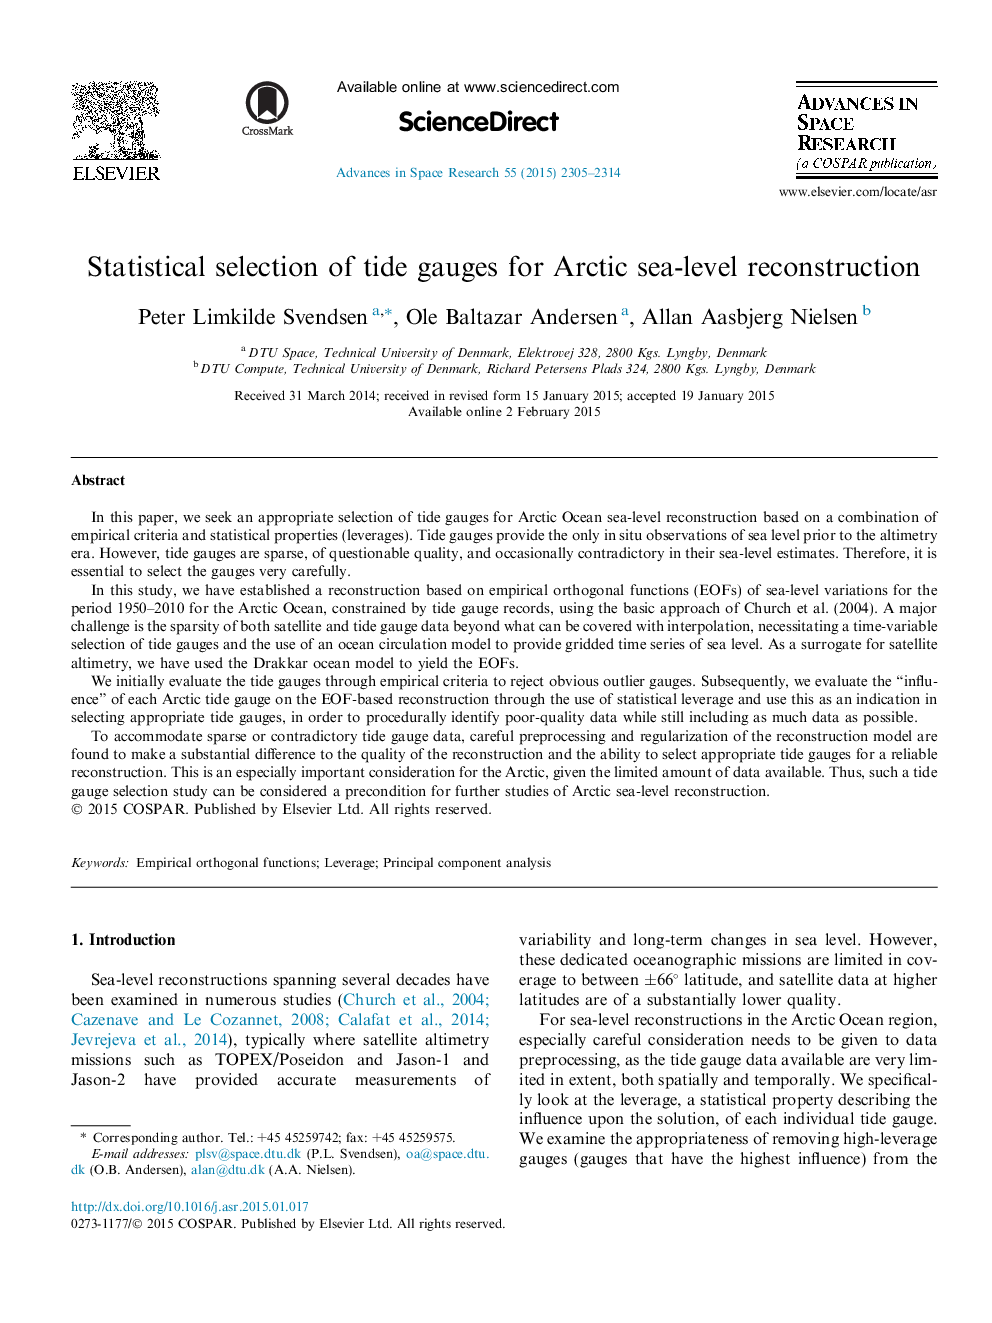 Statistical selection of tide gauges for Arctic sea-level reconstruction